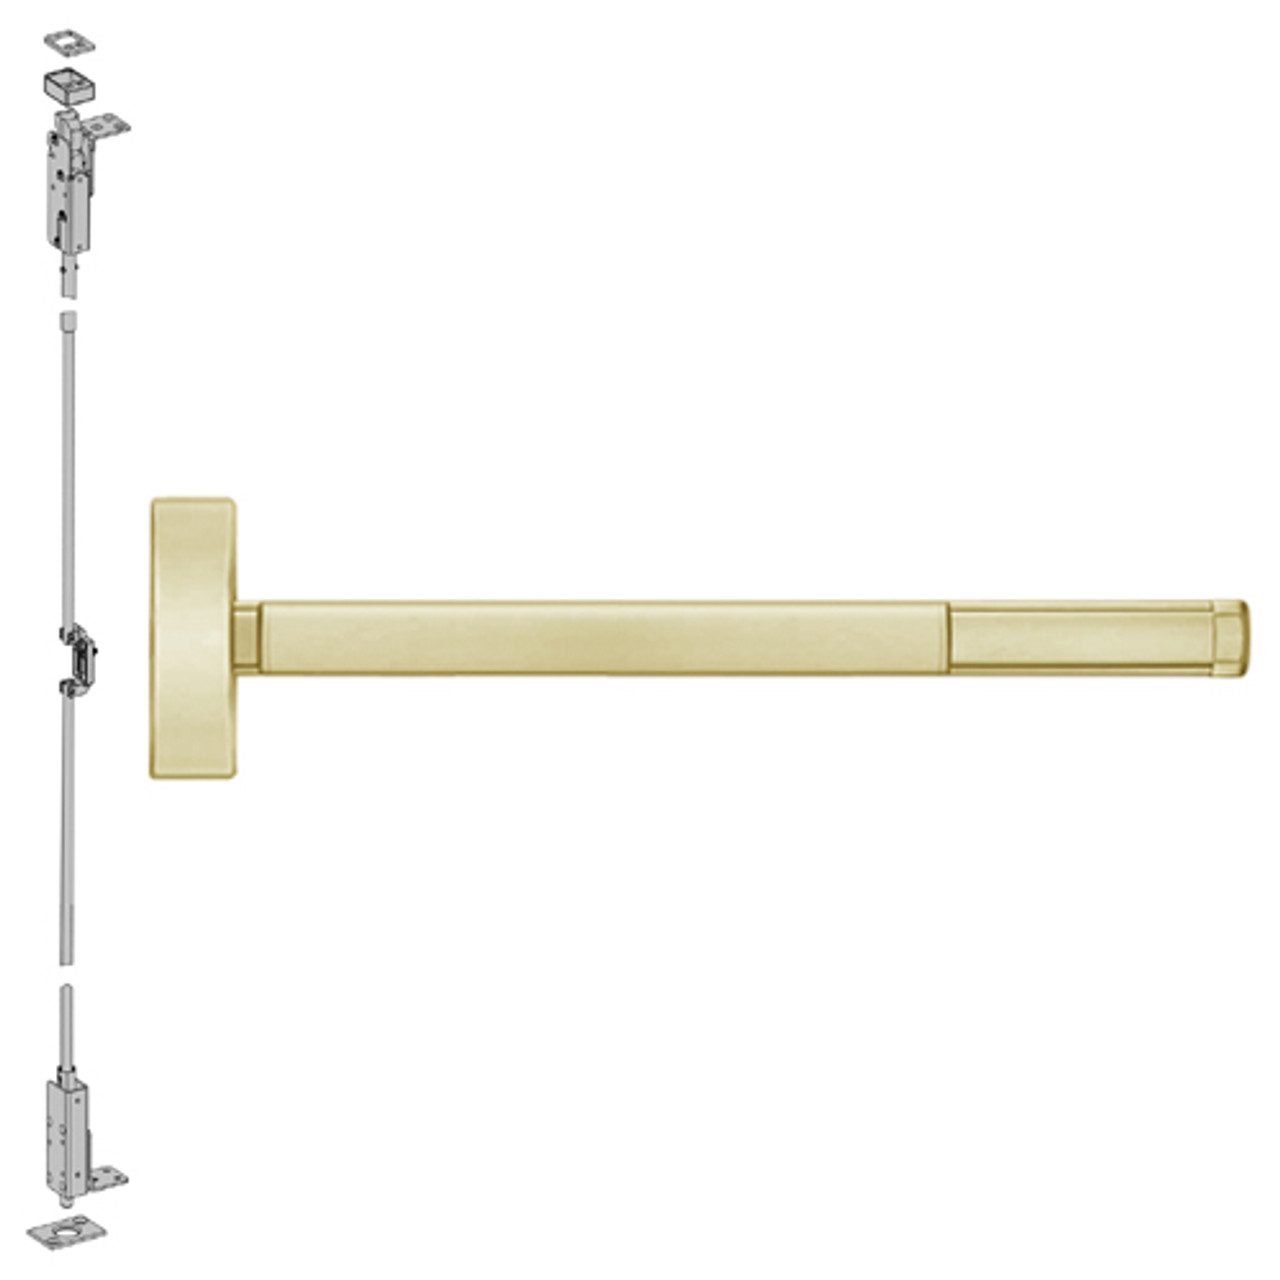 ELR2705LBR-606-48 PHI 2700 Series Wood Door Concealed Vertical Exit Device with Electric Latch Retraction Prepped for Key Controls Thumb Piece in Satin Brass Finish